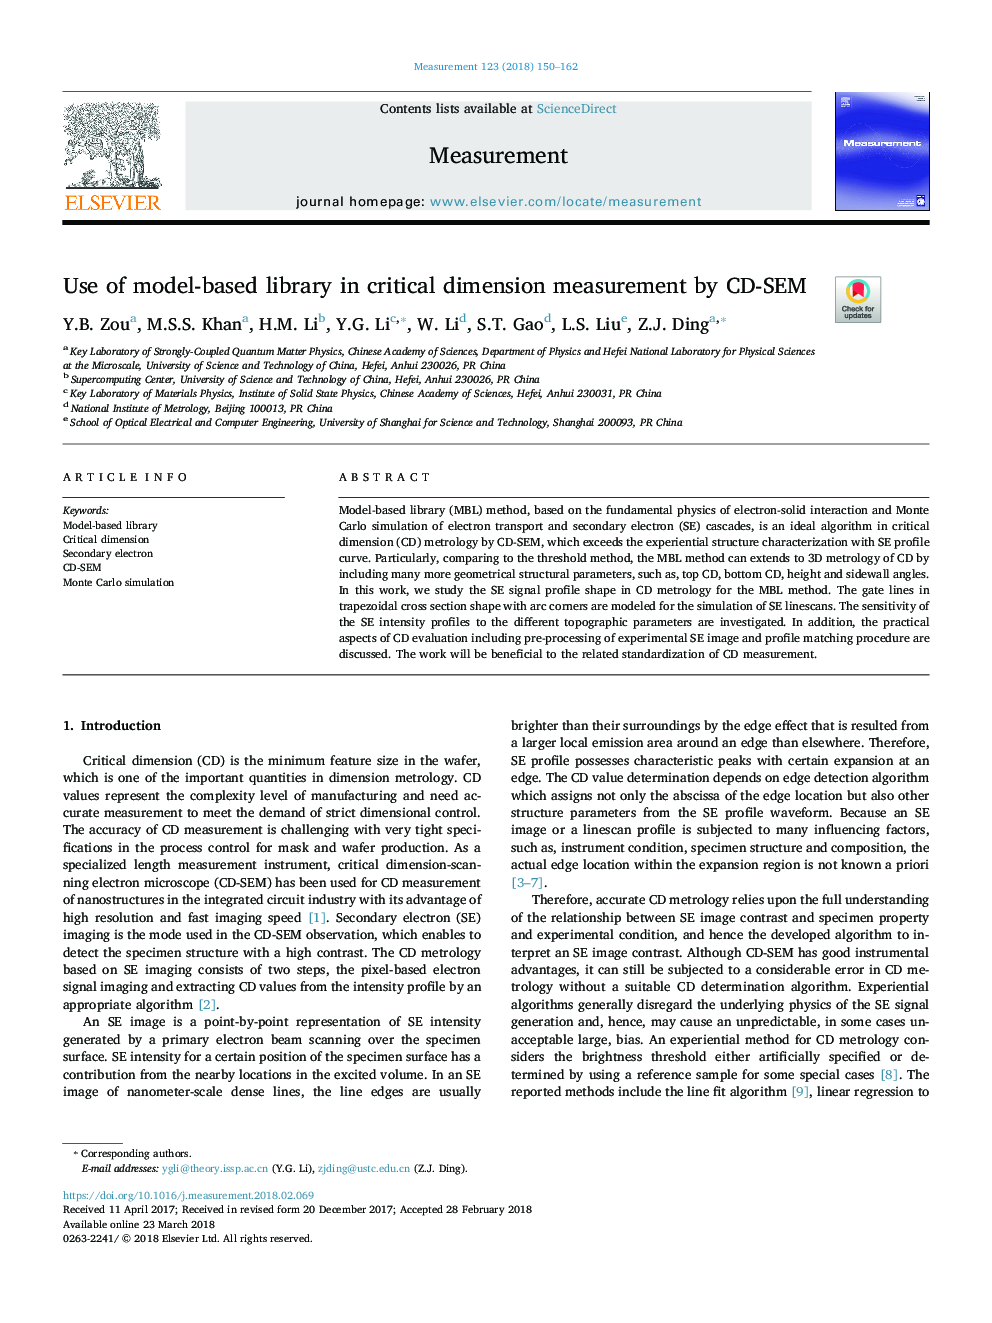 Use of model-based library in critical dimension measurement by CD-SEM